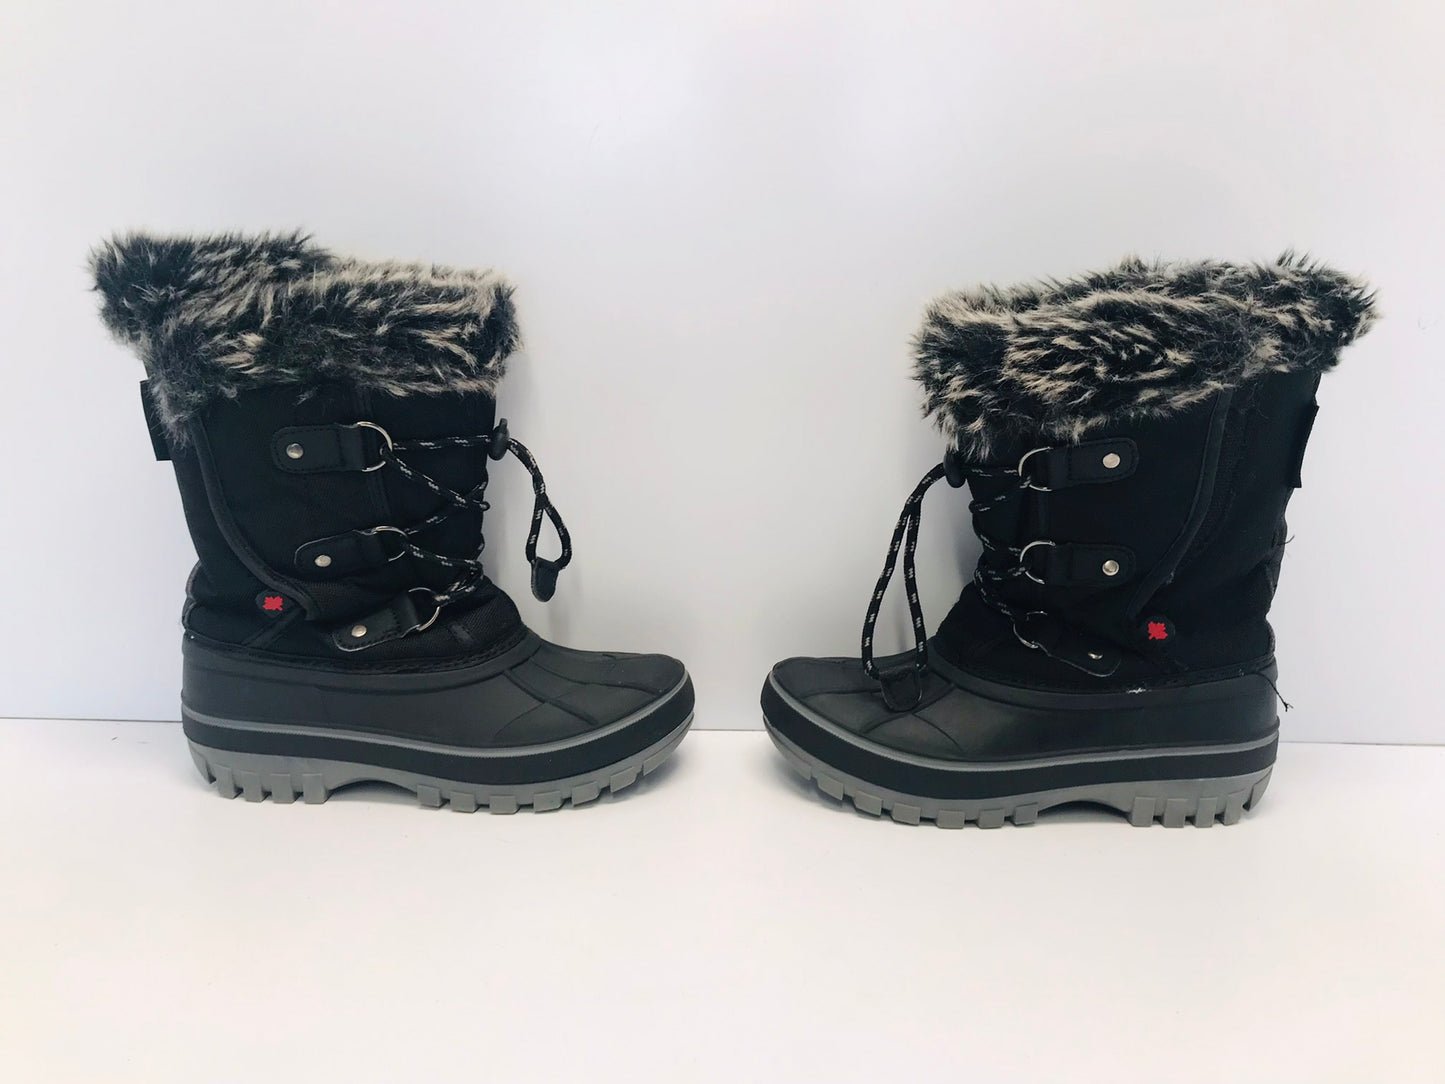 Winter Boots Child Size 1 Canadian Black With Faux Fur Like New